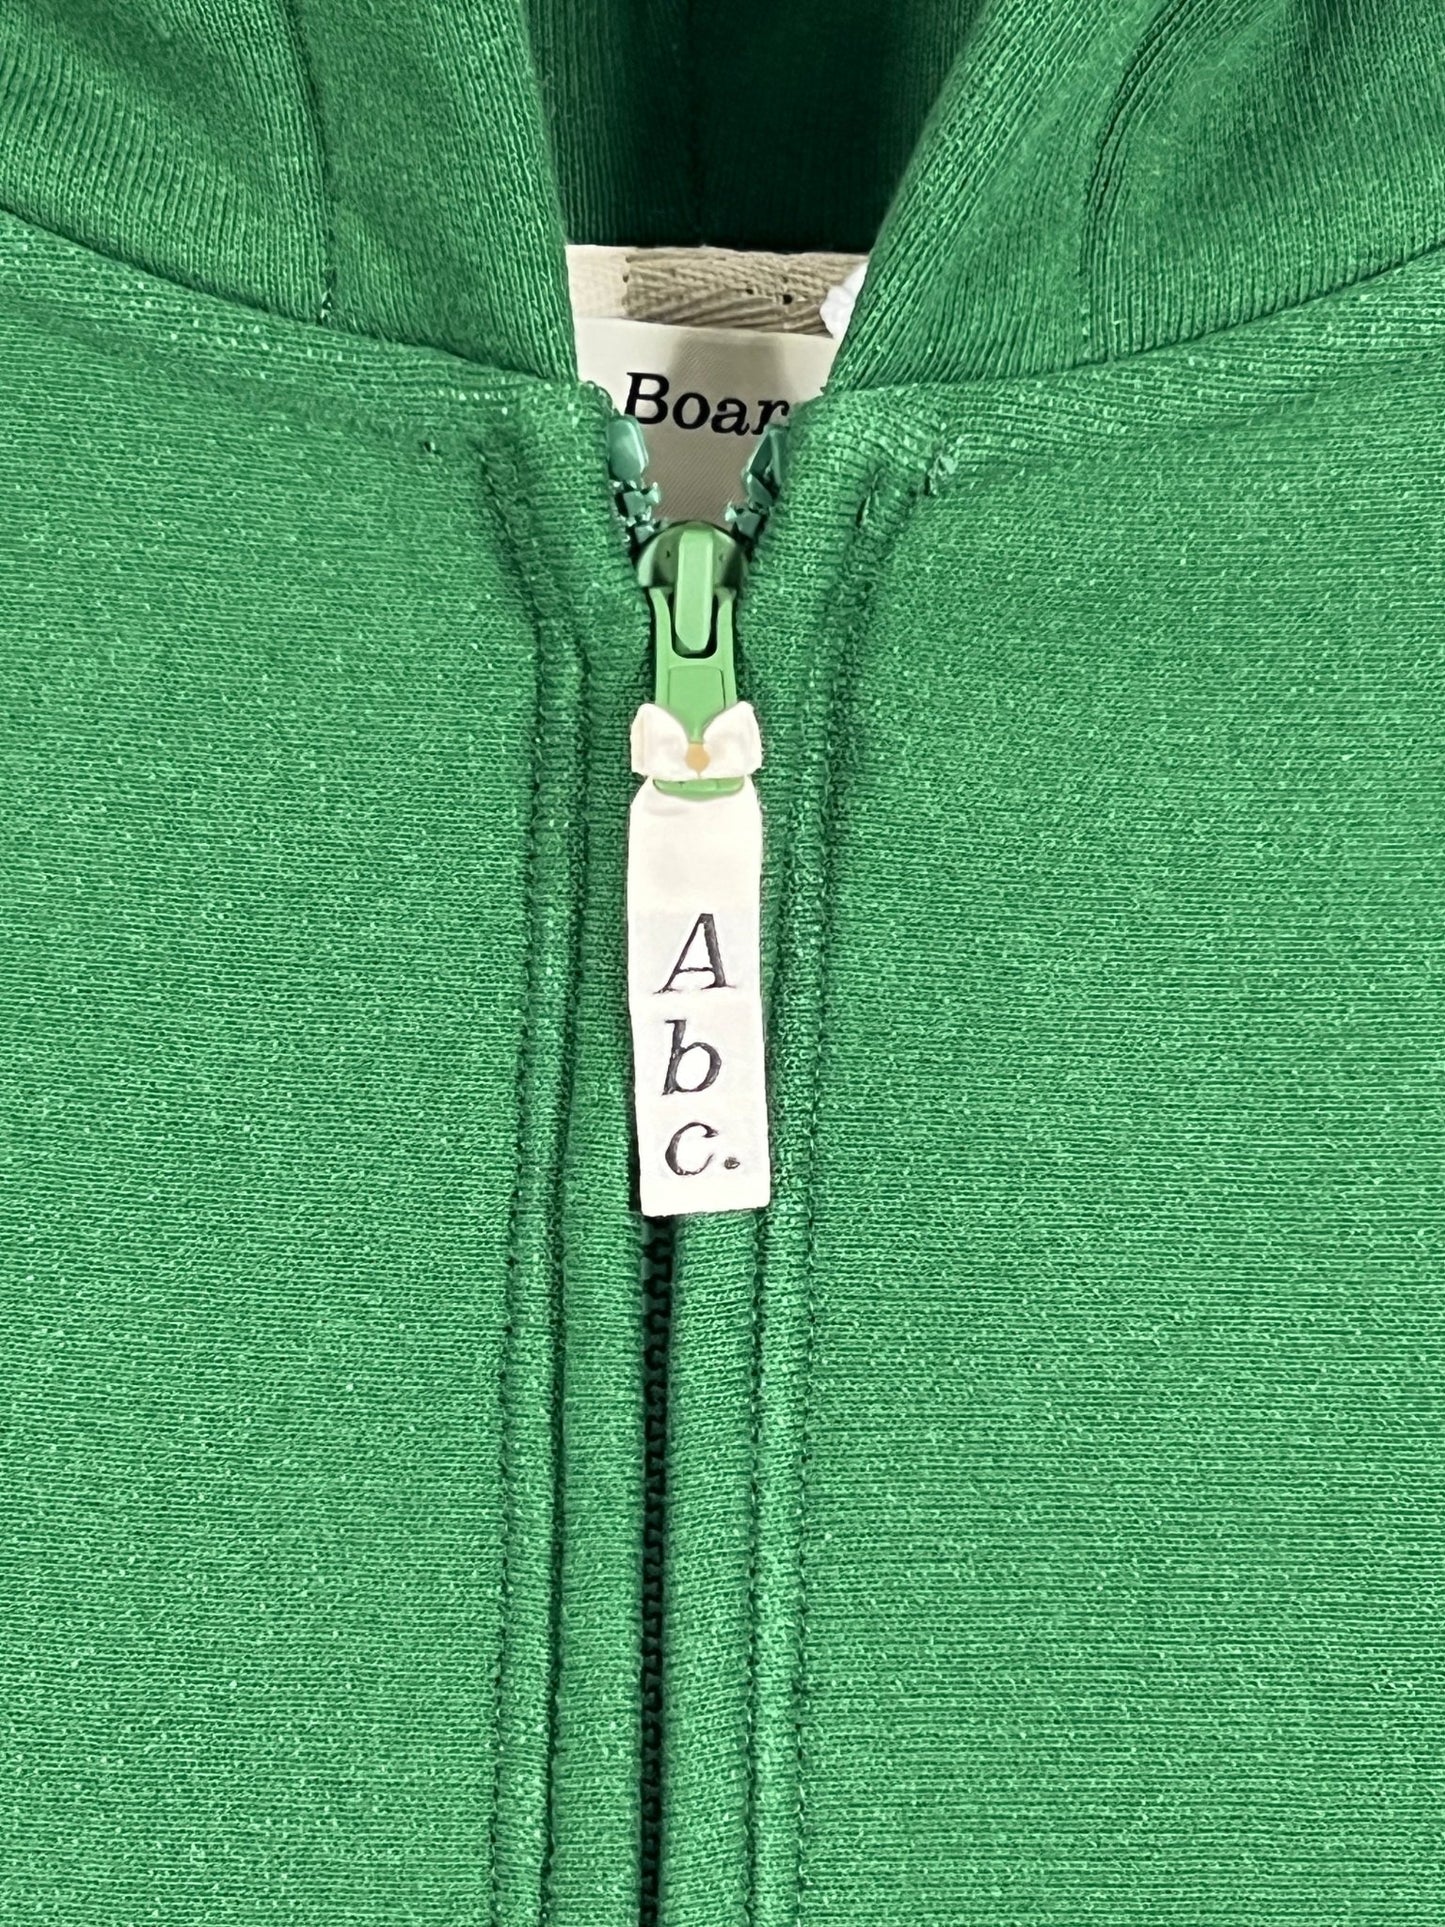 A green zip-up hoodie with the ADVISORY BOARD CRYSTALS logo on it.